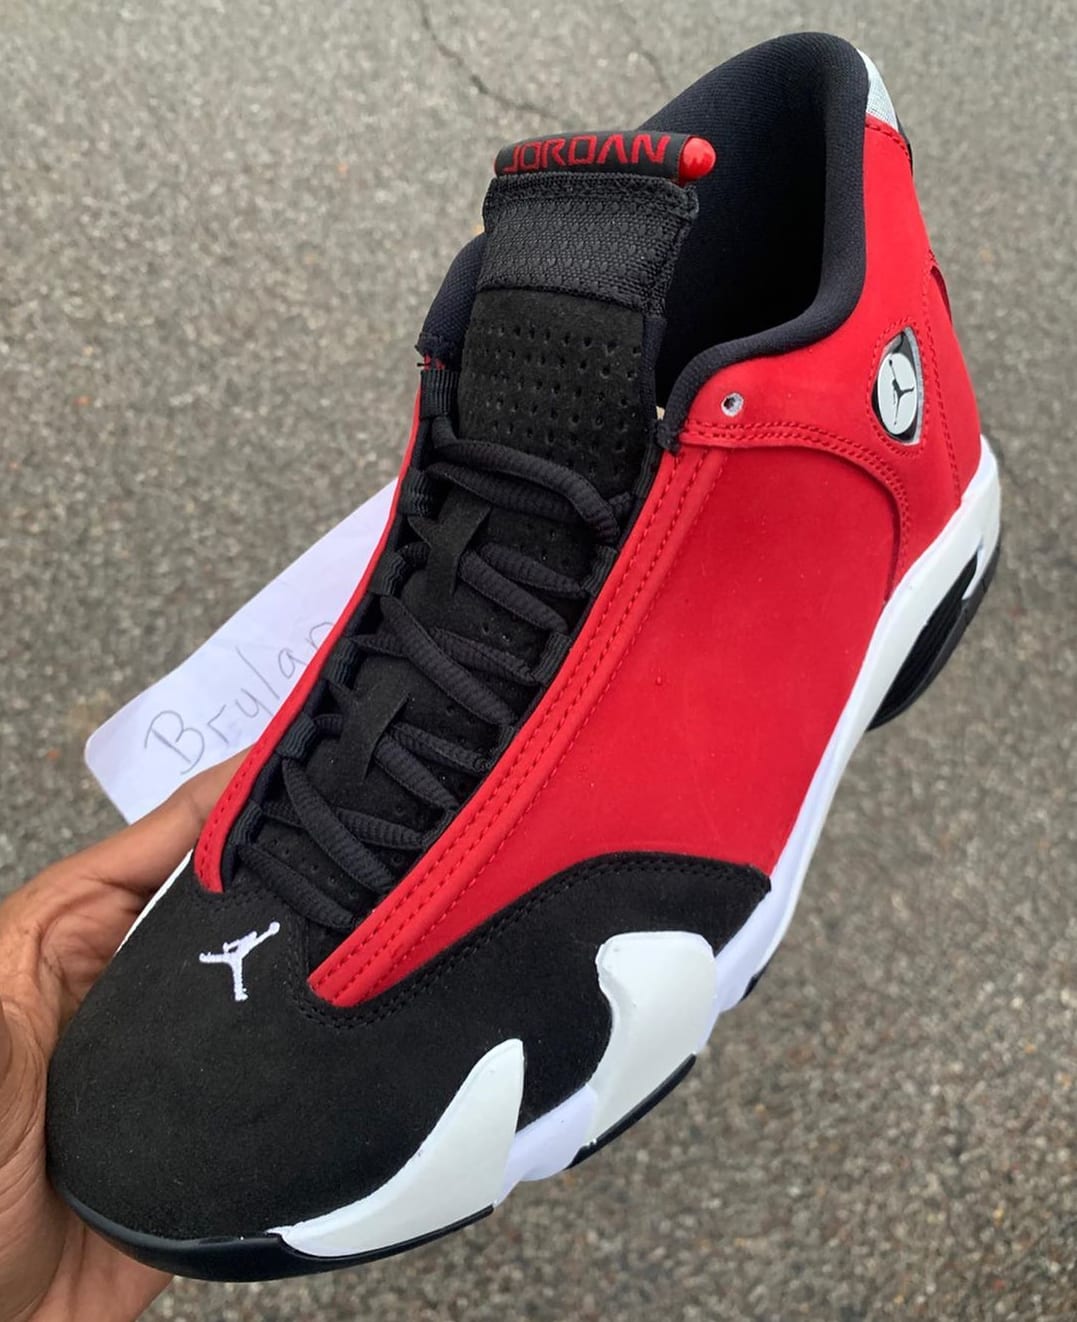 Air Jordan 14 XIV Retro 'Gym Red' Release Date 487471006 Sole Collector